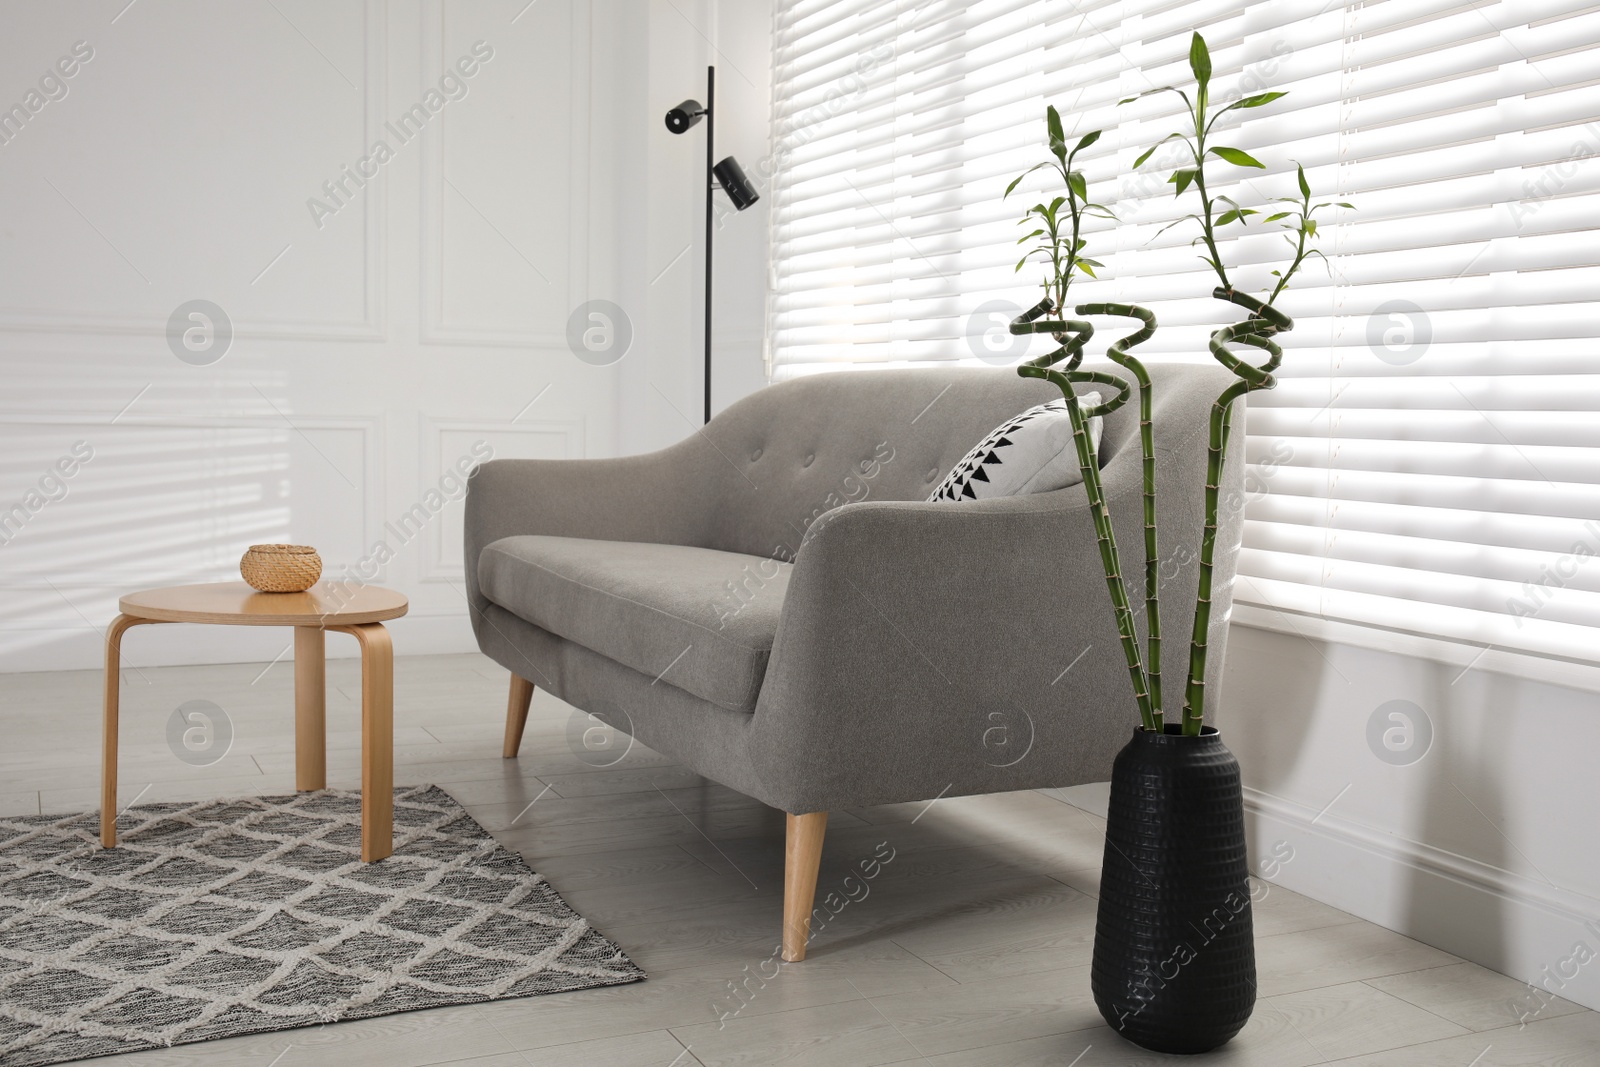 Photo of Vase with green bamboo stems near sofa in living room interior